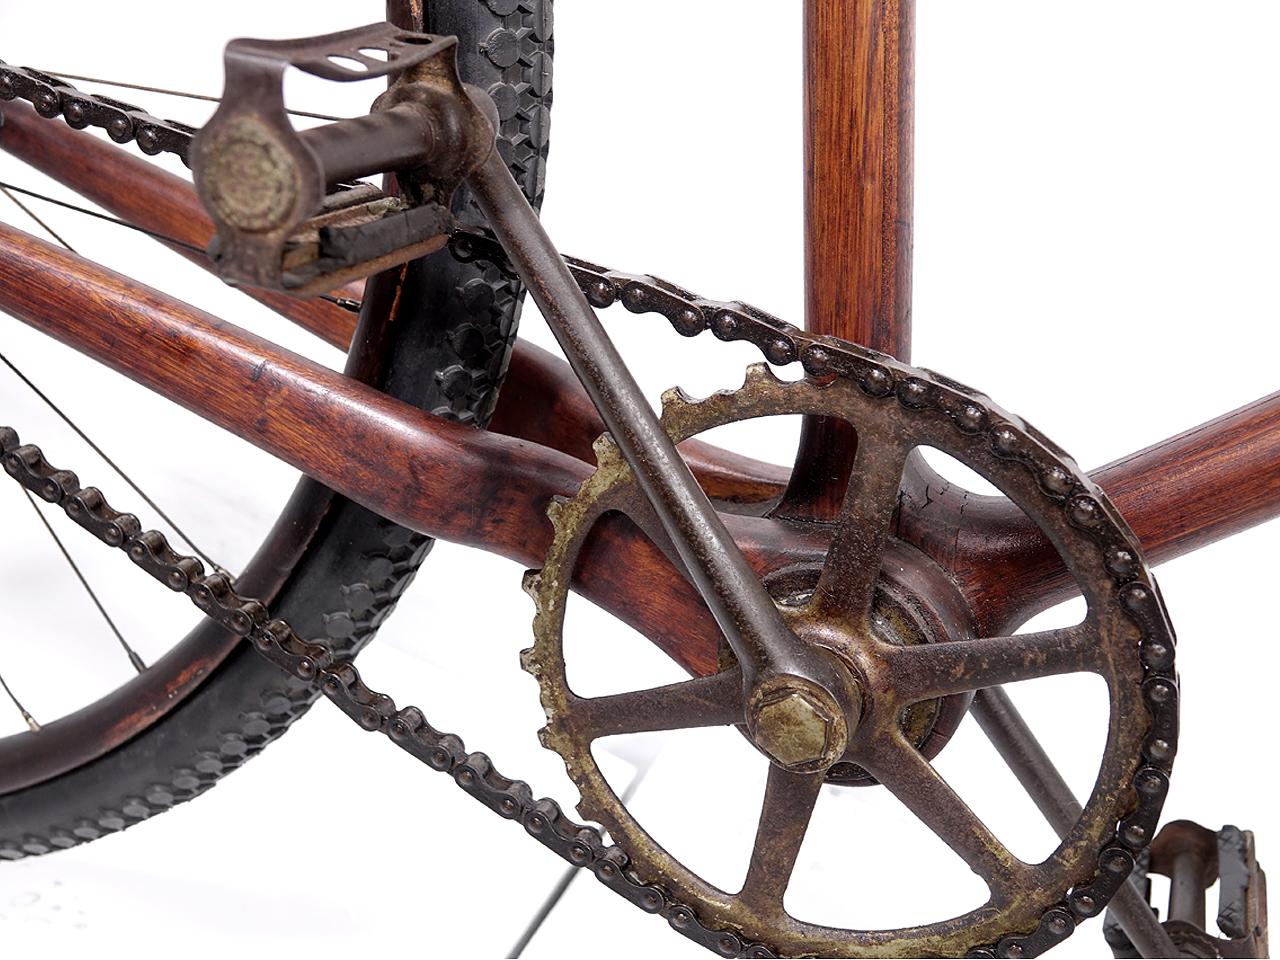 1890 bicycle